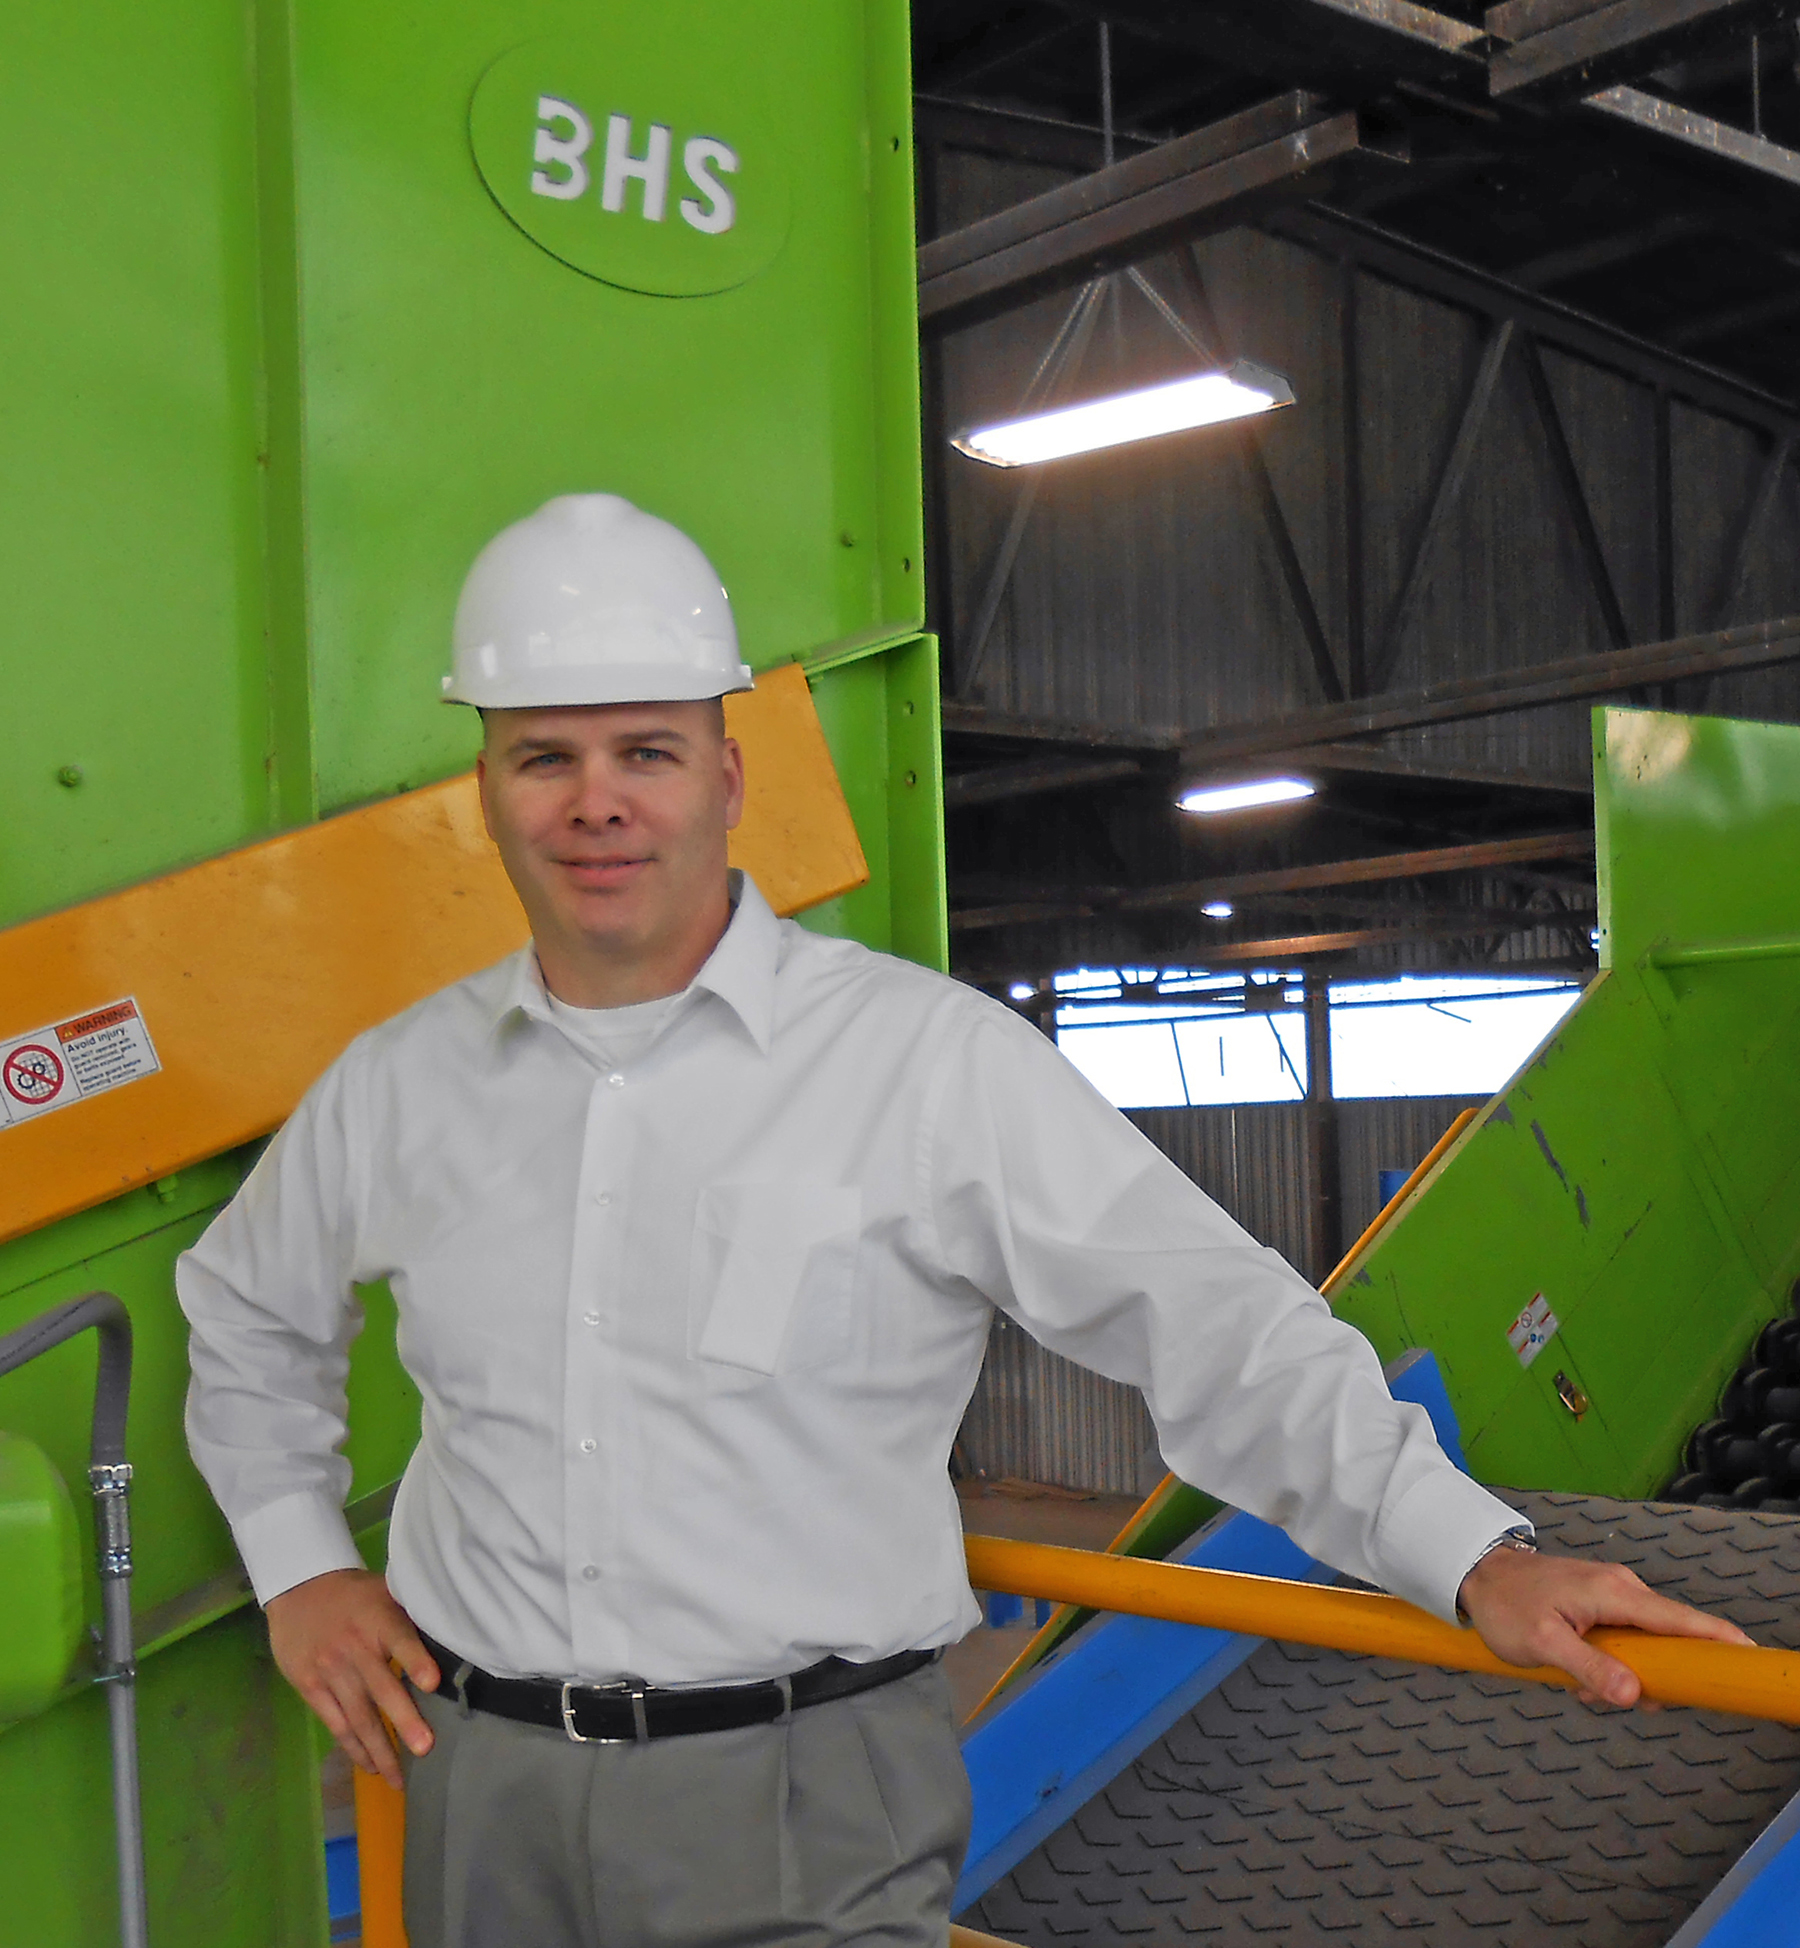 BHS Names John Warne President, Bryce Malone Director of Sales and ...